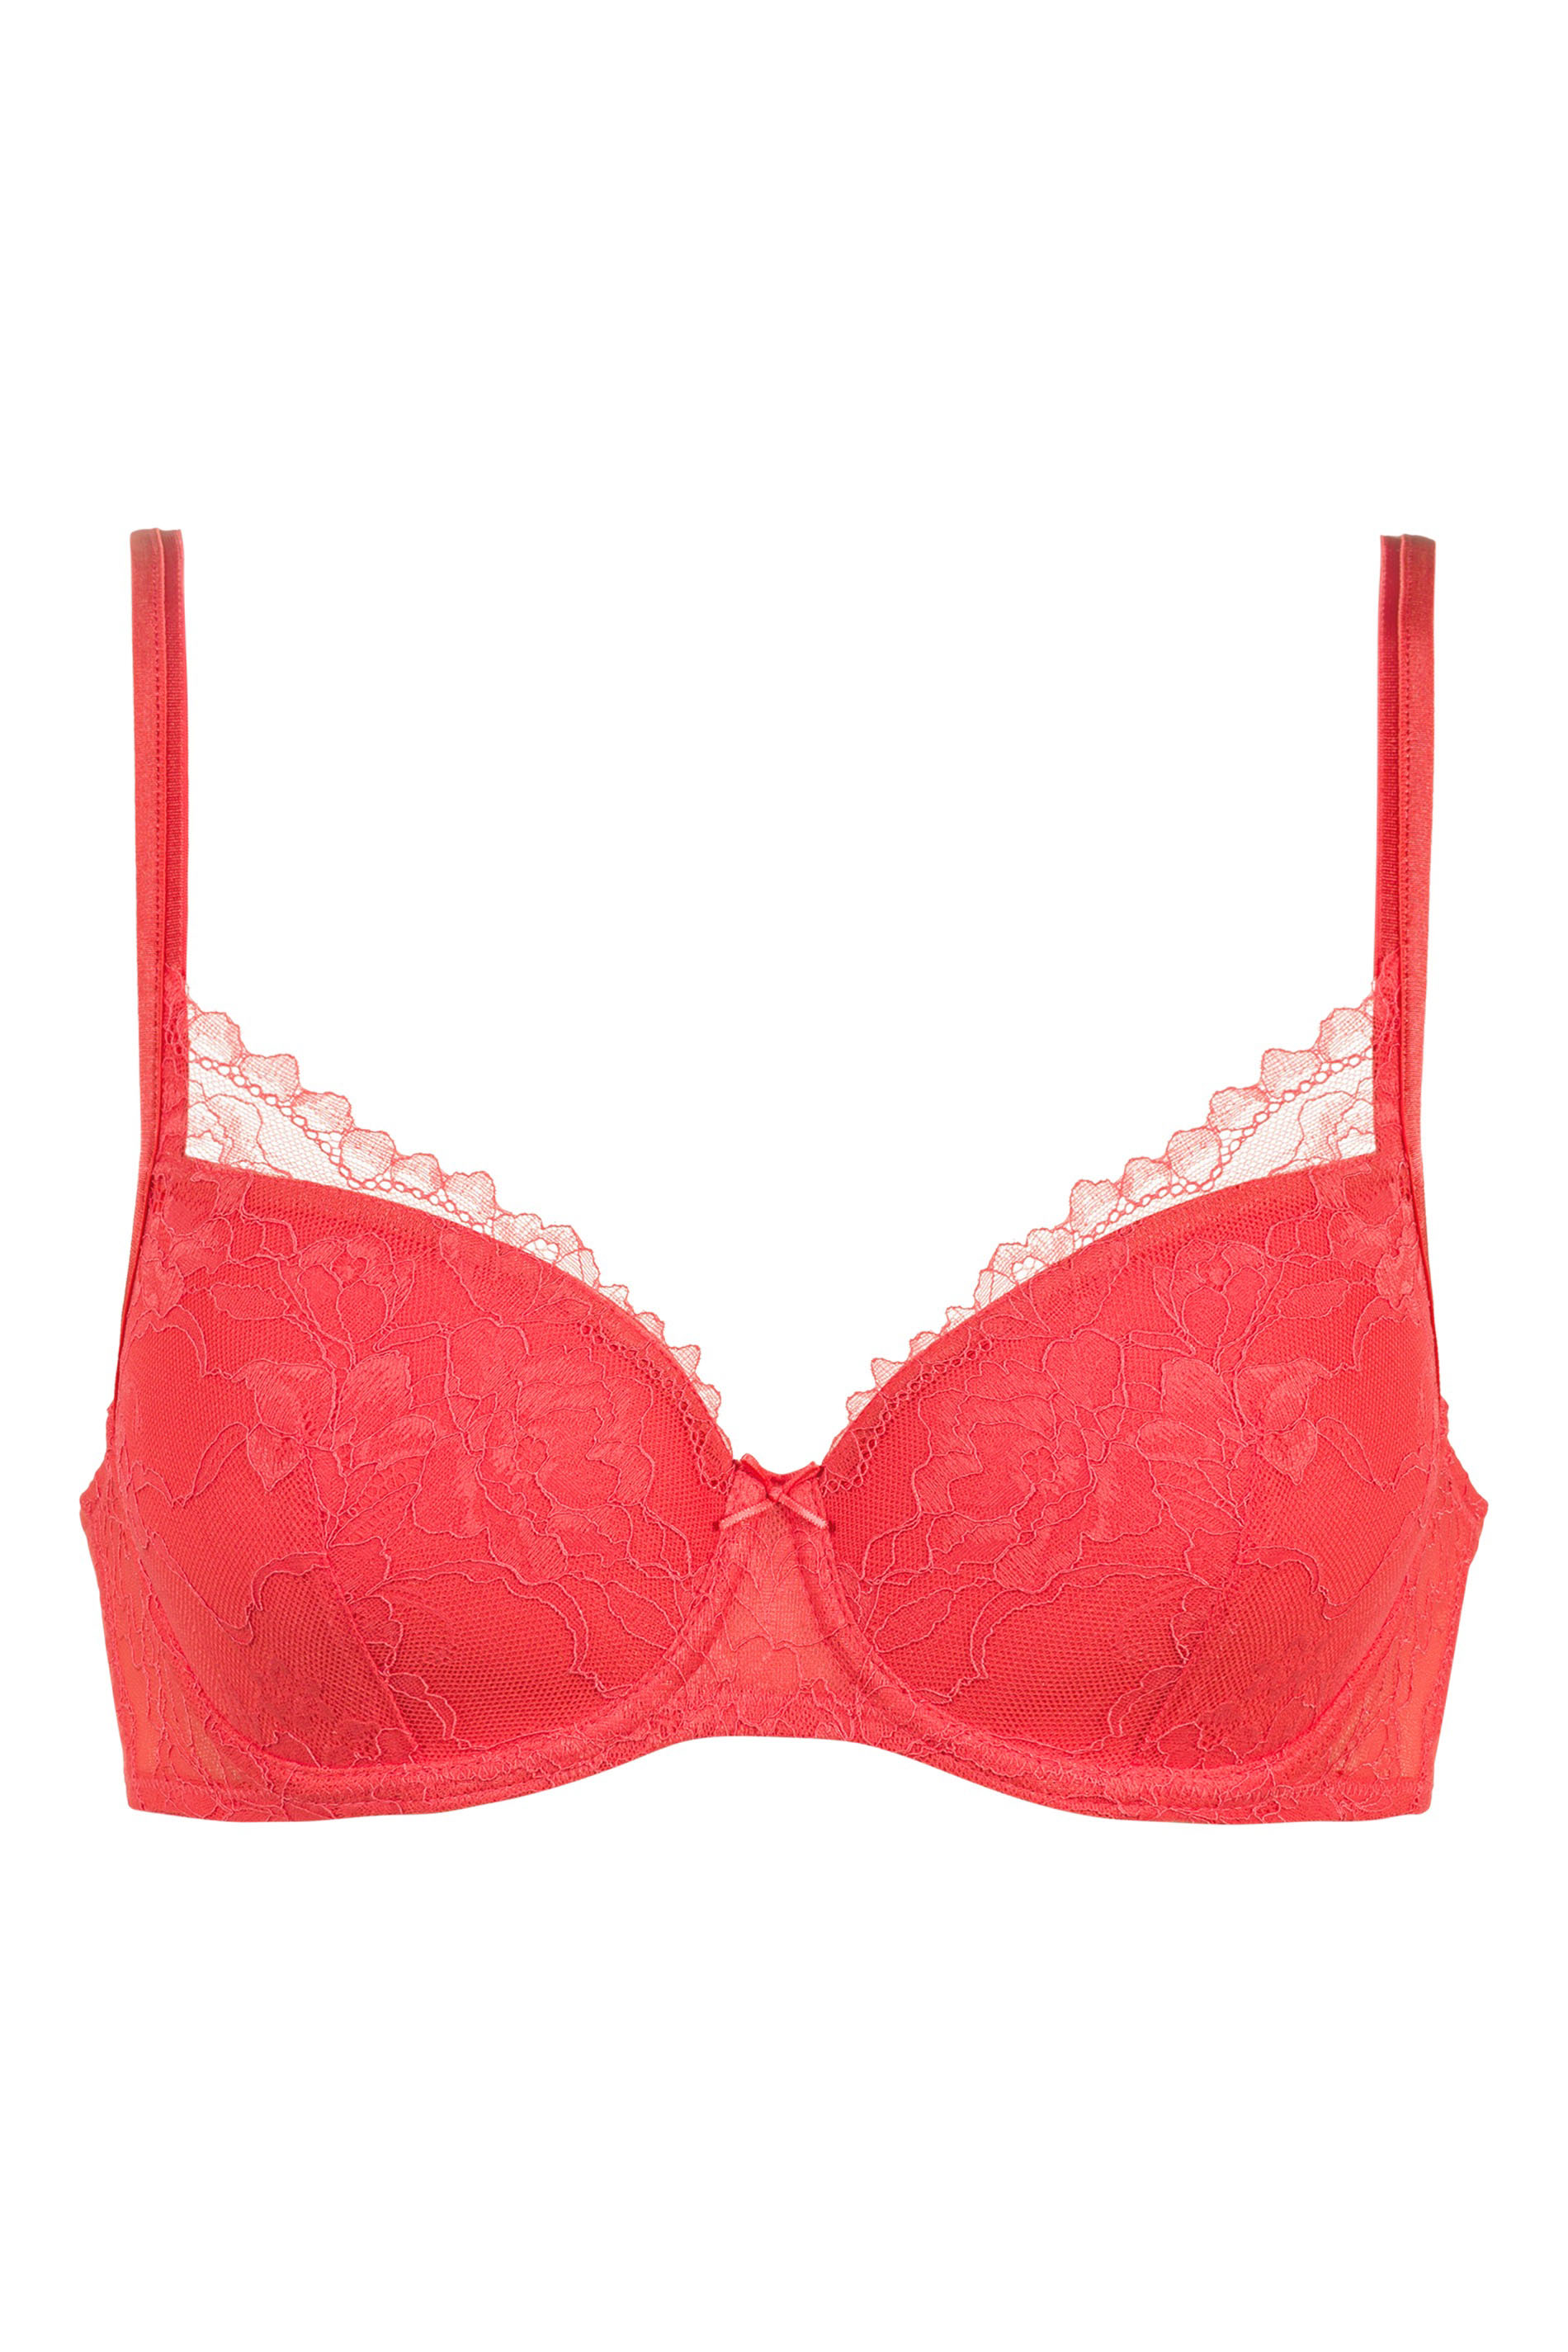 Spacer bra | Half Cup Serie Fabulous Cut Out | mey®